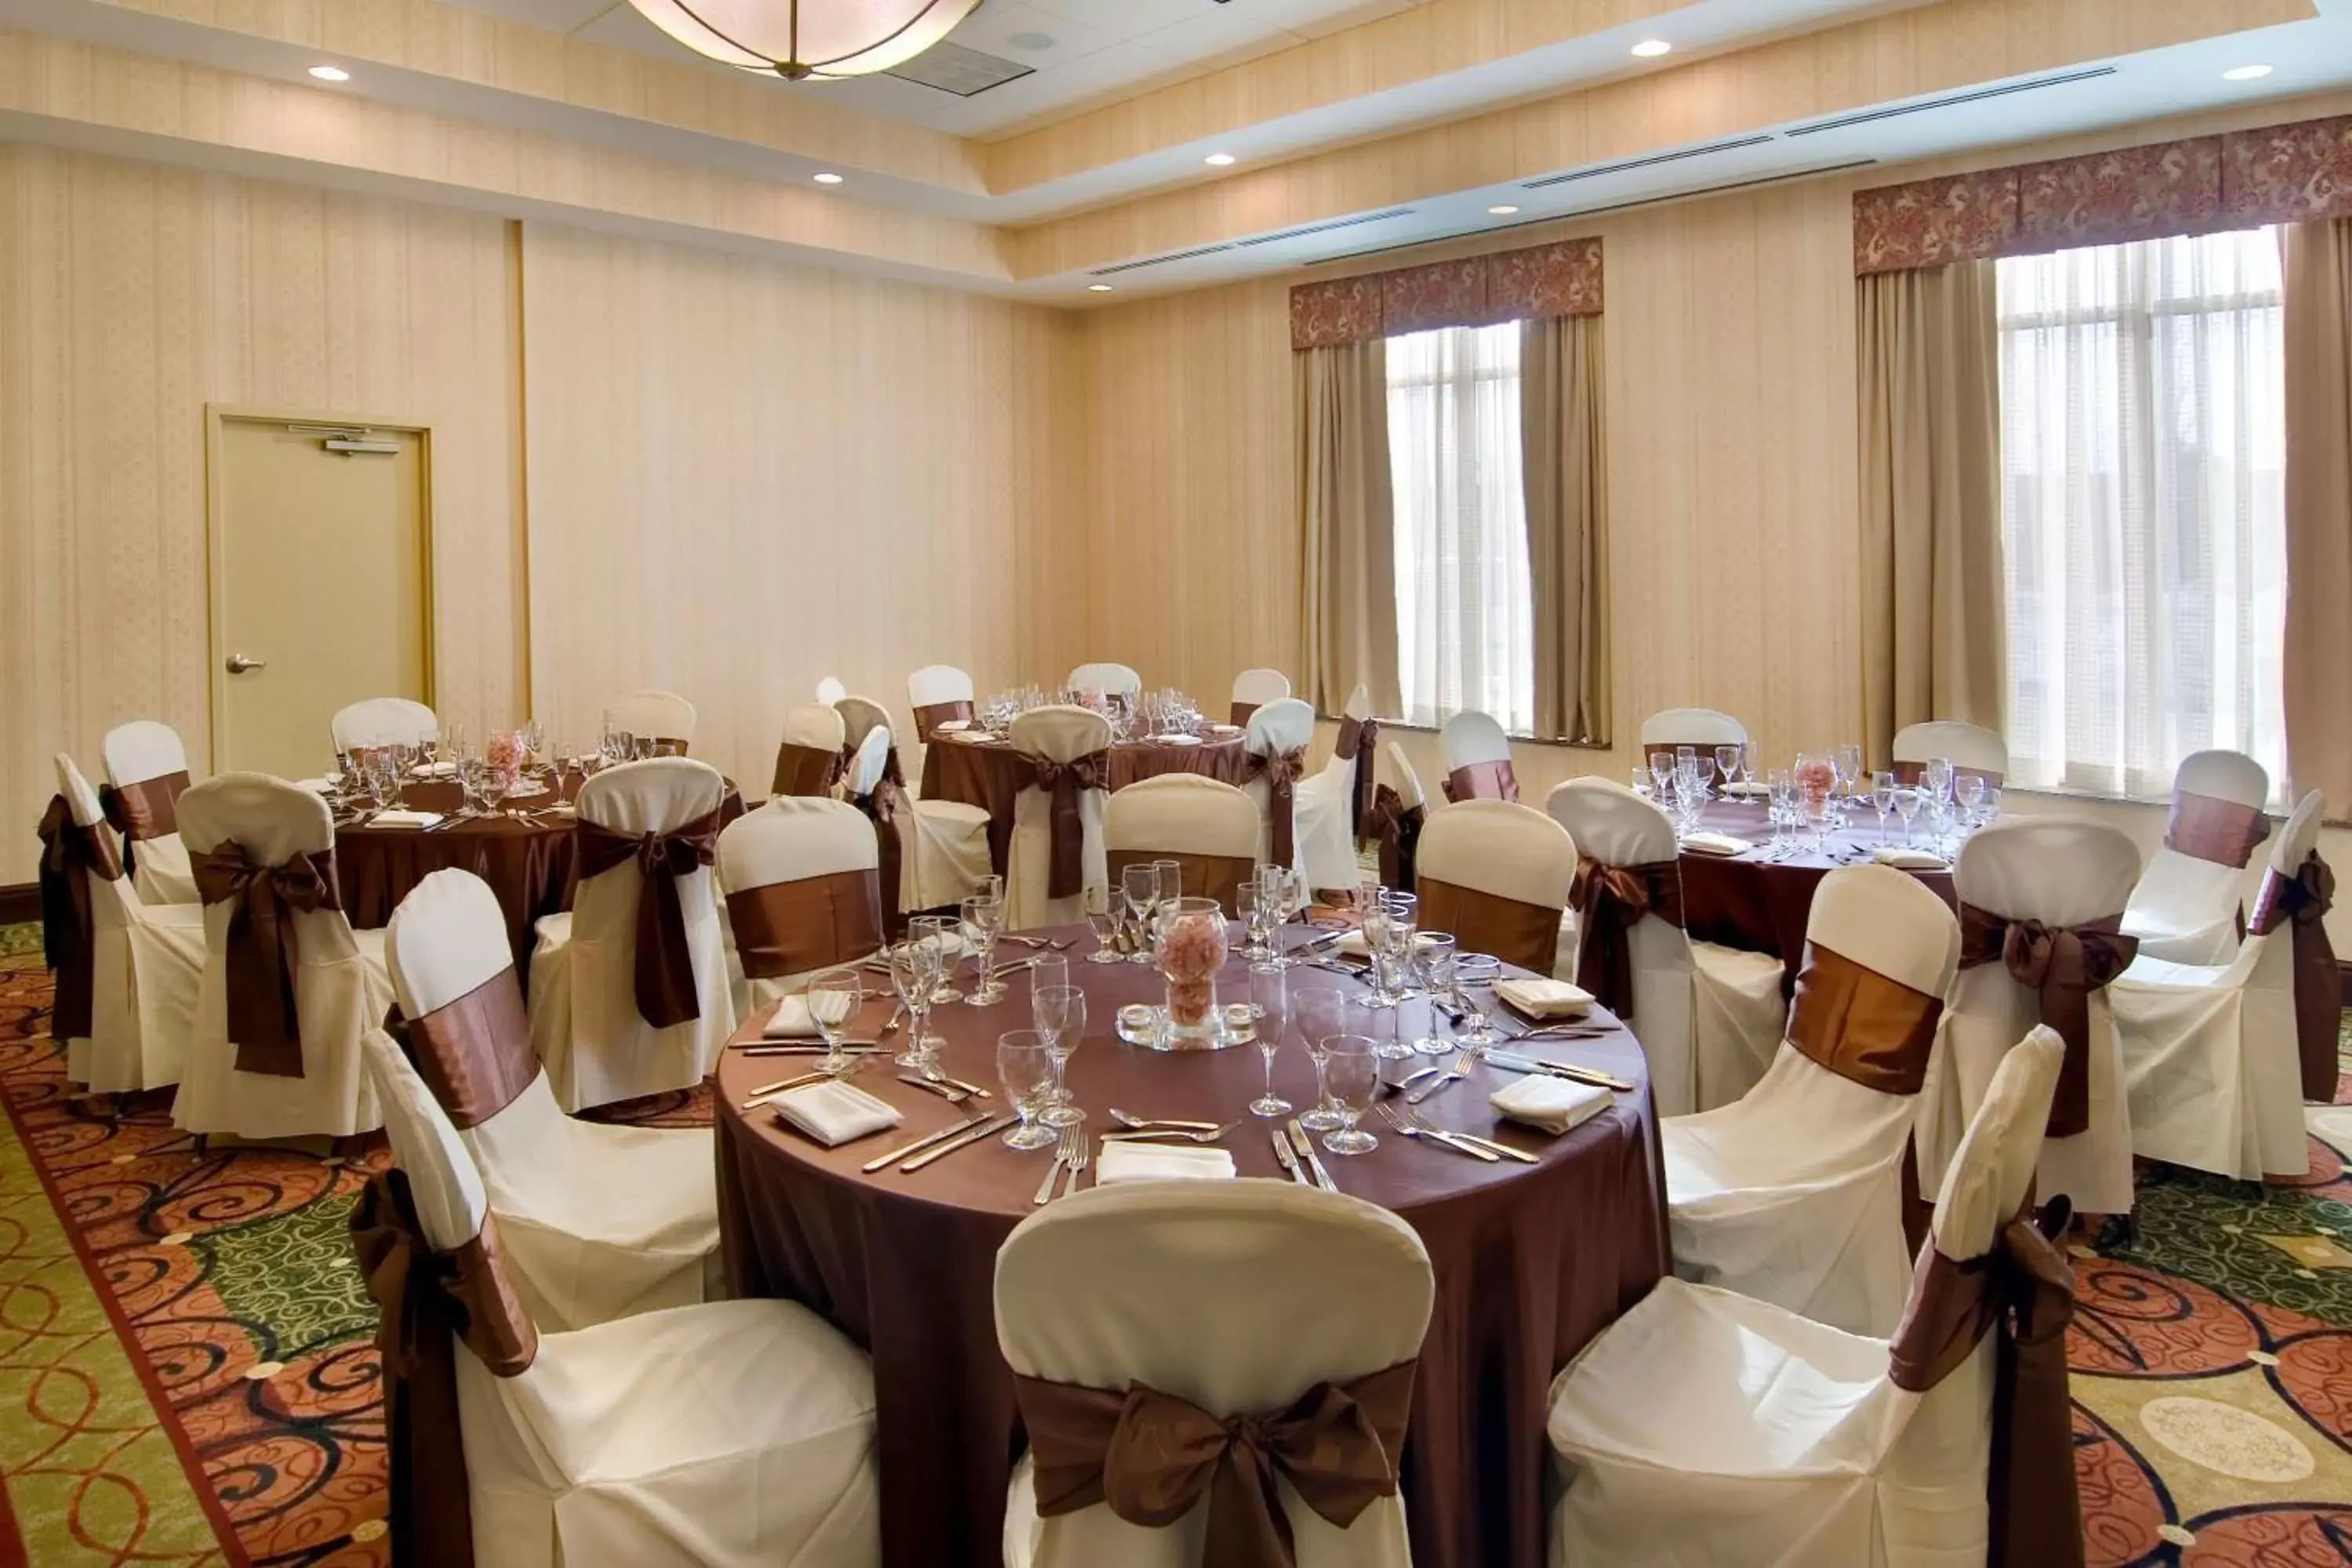 Meeting/conference room, Banquet Facilities in Hilton Garden Inn Cleveland East / Mayfield Village